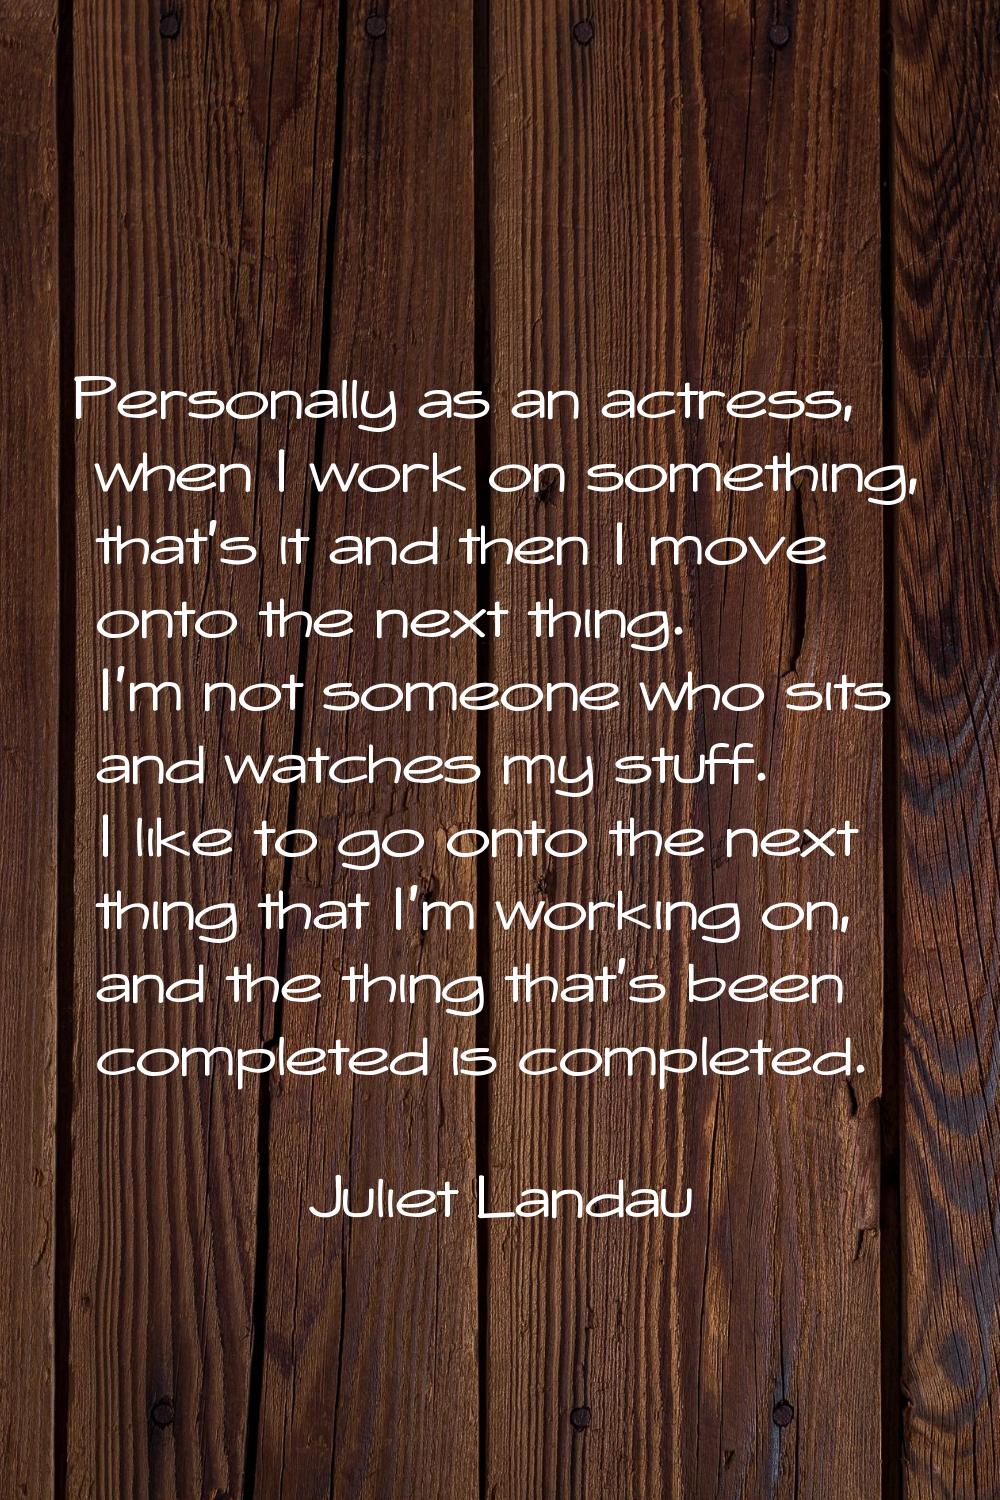 Personally as an actress, when I work on something, that's it and then I move onto the next thing. 